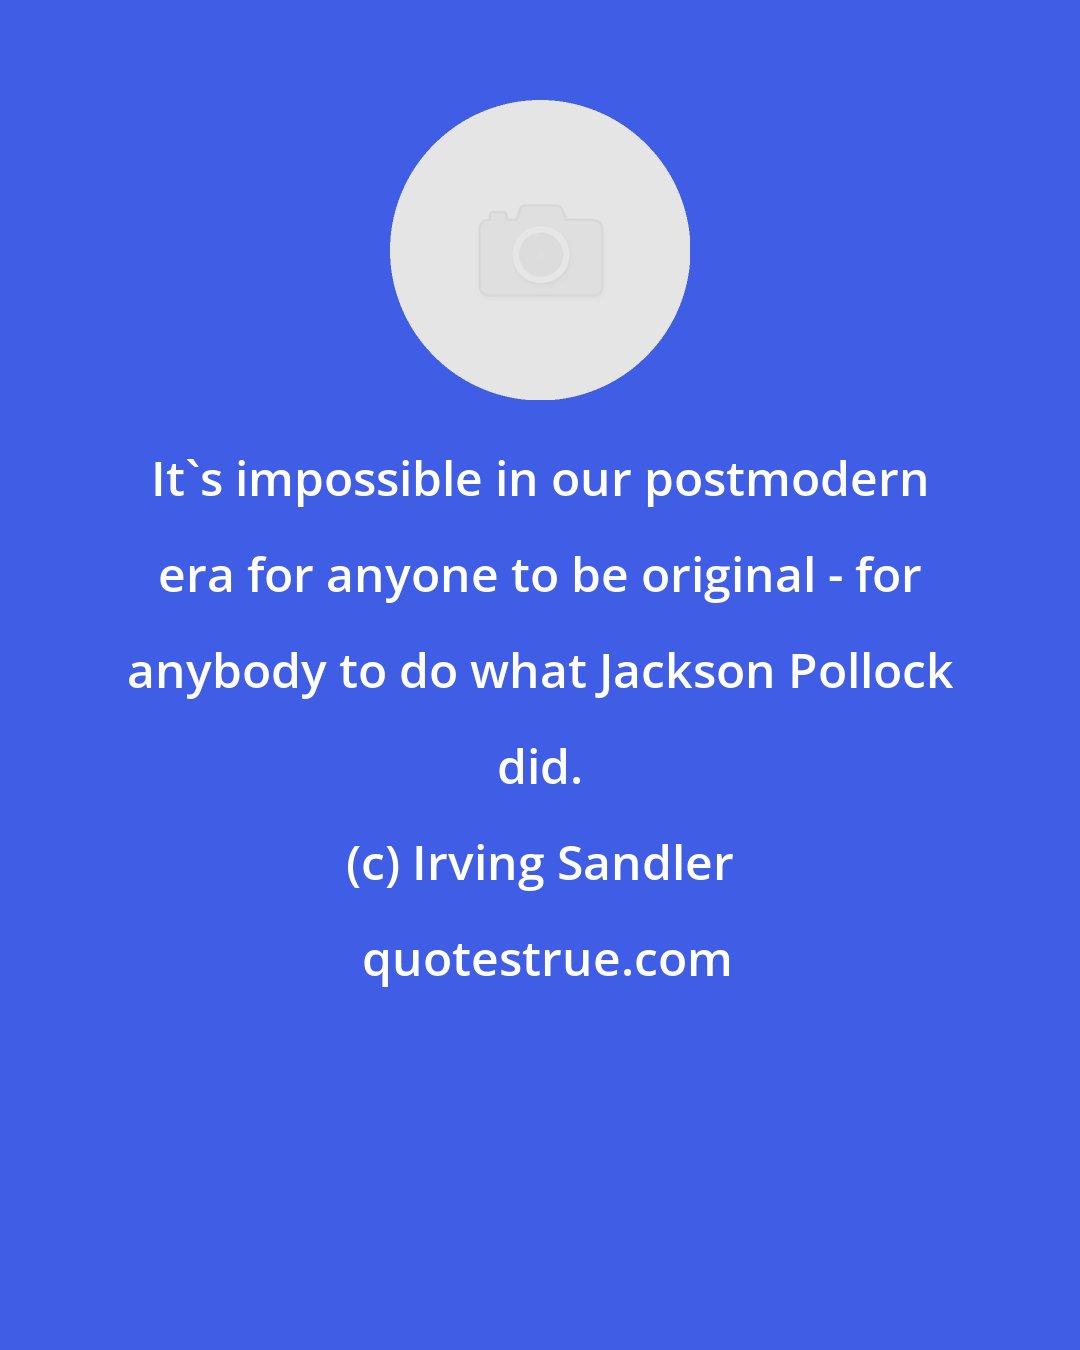 Irving Sandler: It's impossible in our postmodern era for anyone to be original - for anybody to do what Jackson Pollock did.